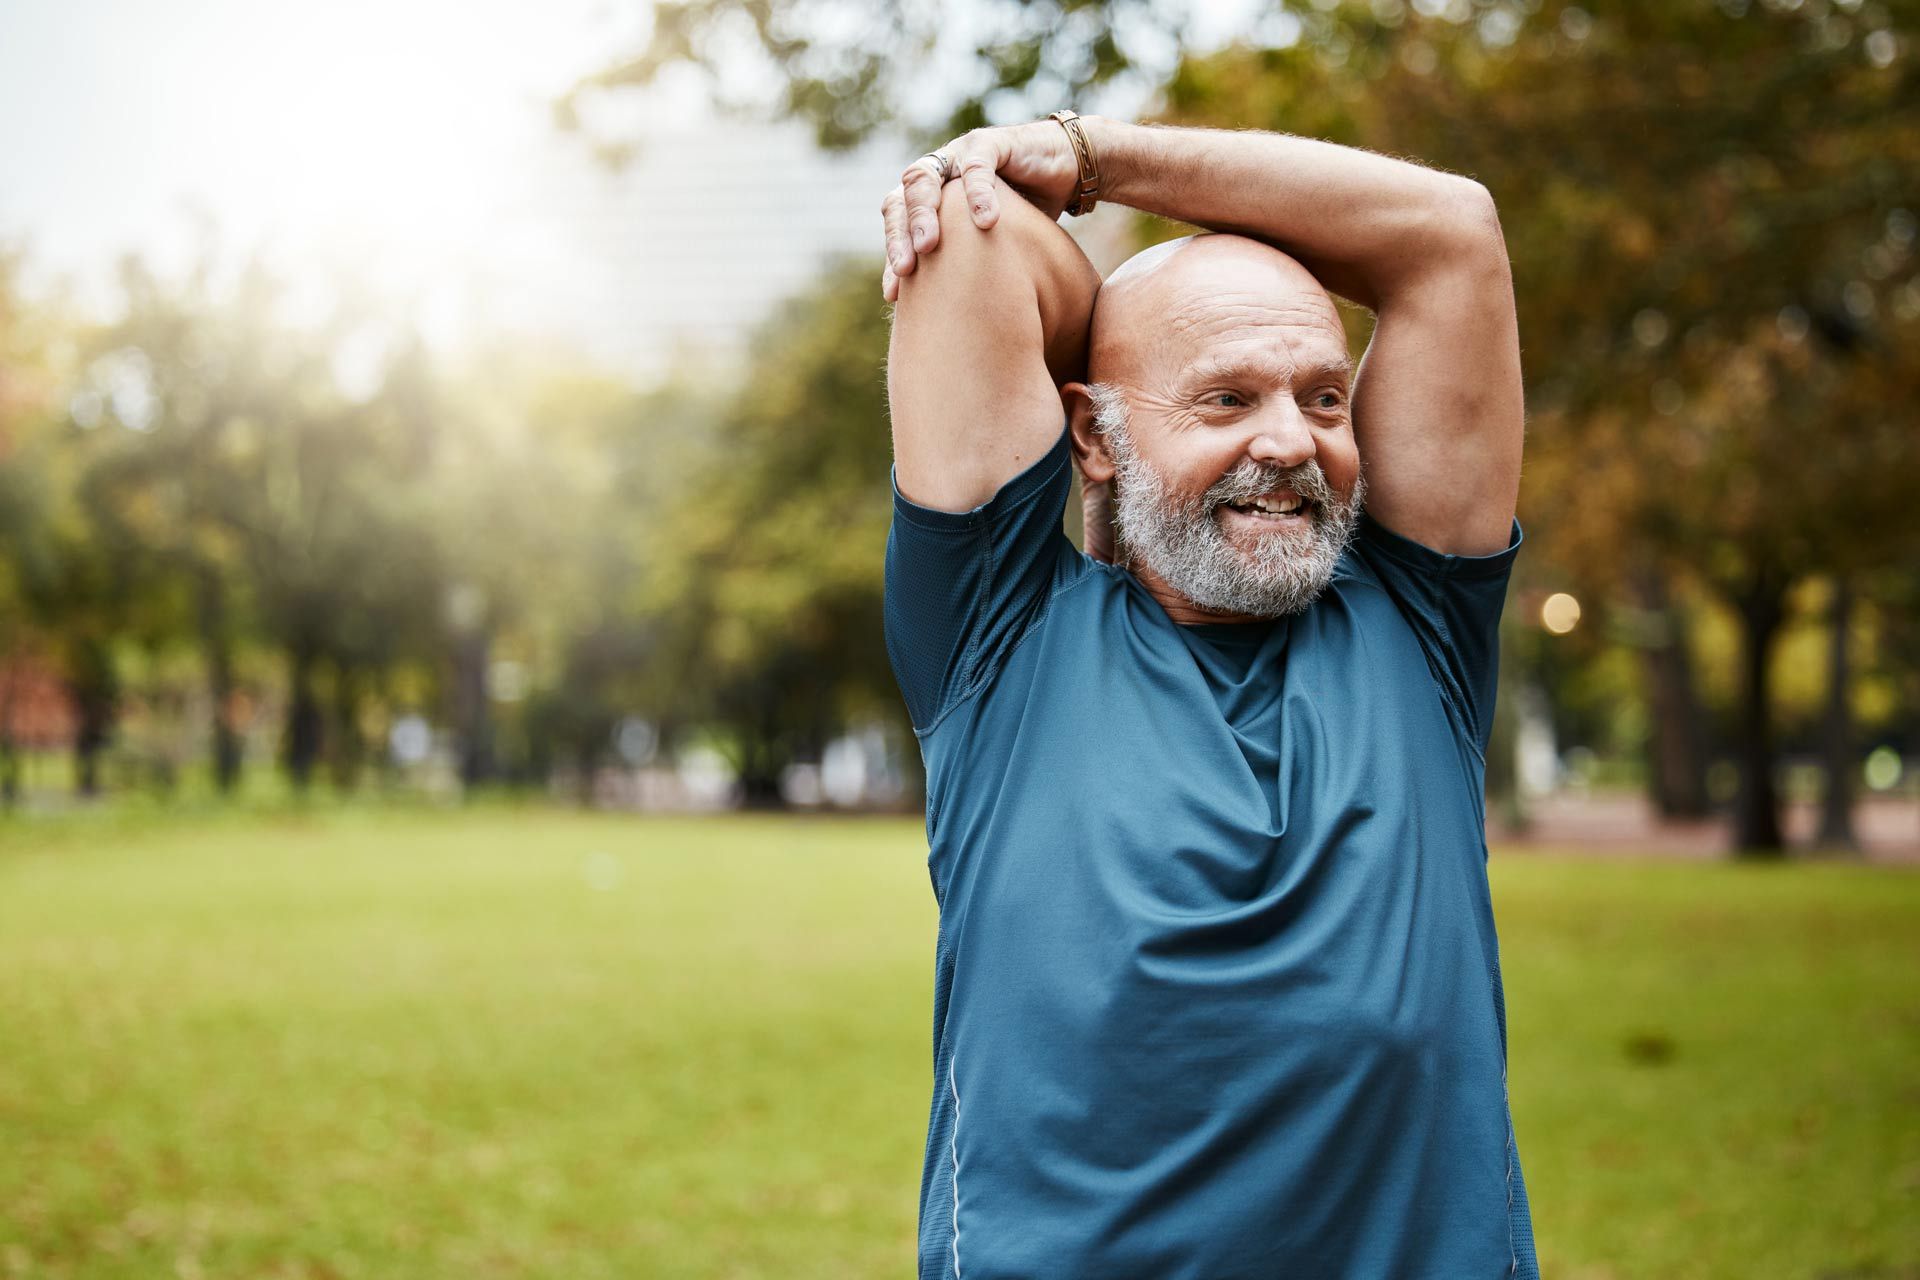 An older man is stretching his arms in a park.